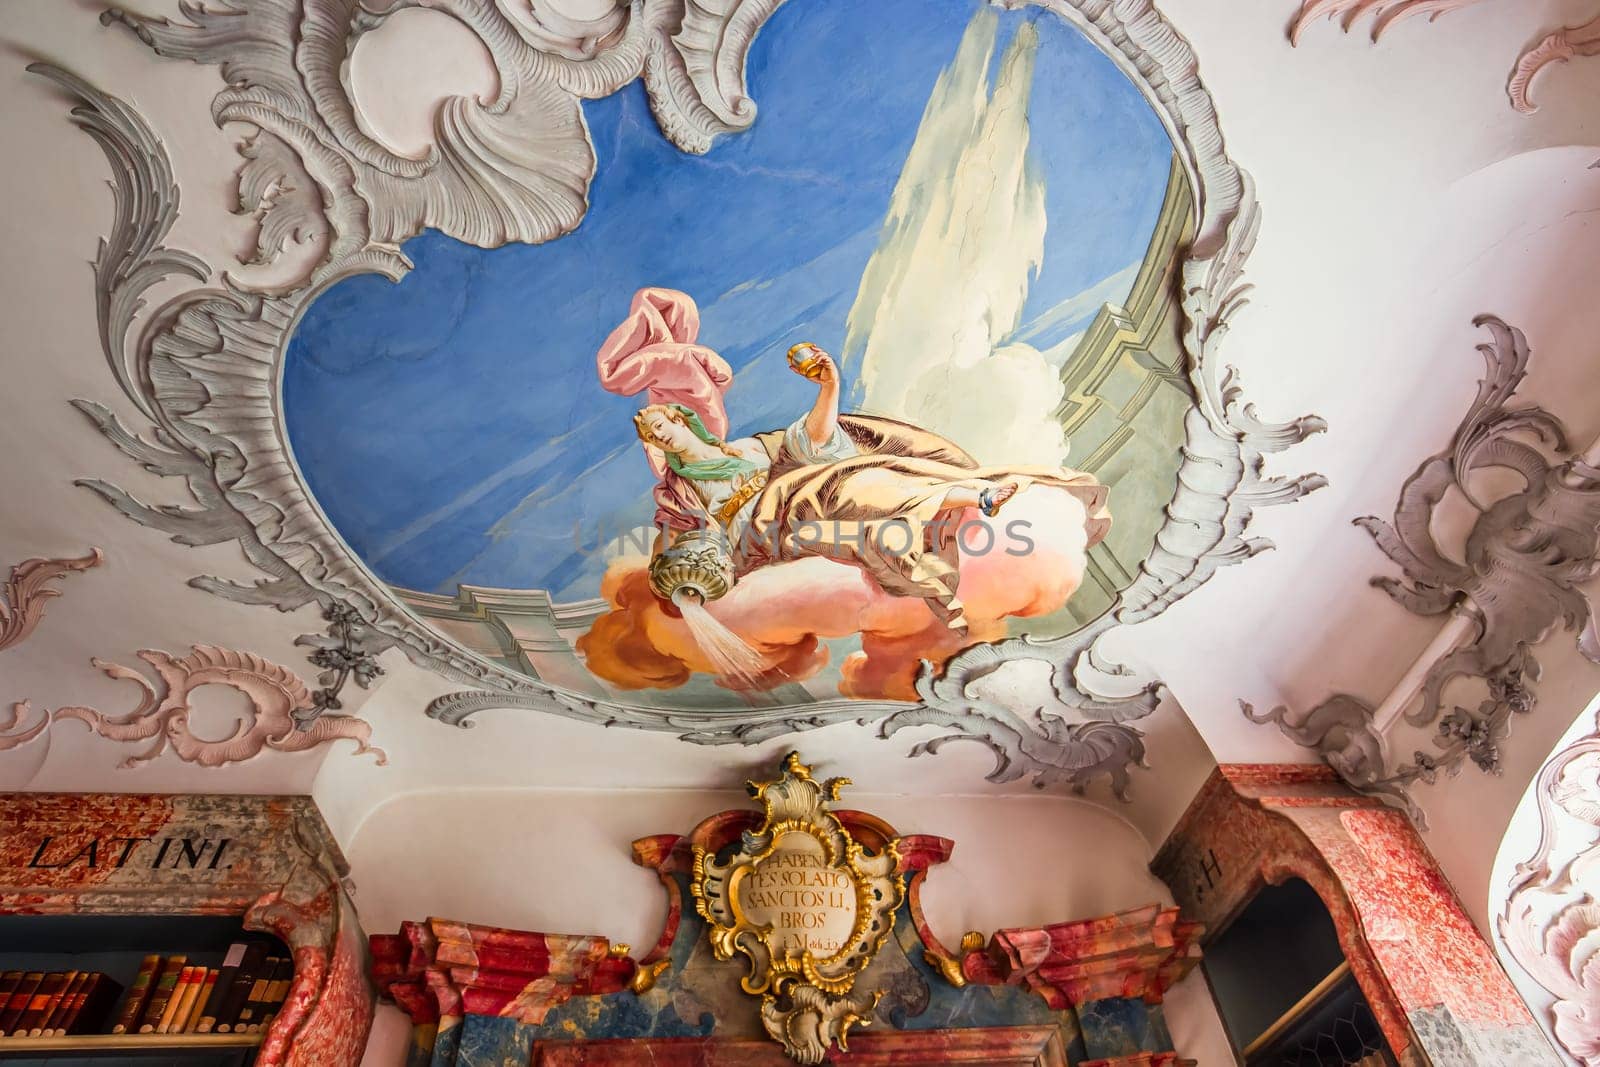 WIBLINGEN, BAVARIA, GERMANY, JUNE 08, 2022 : Rococo and baroque decors of the library in Wiblingen abbey, near Ulm city, by architects Christian and Johann Wiedemann, 18th century